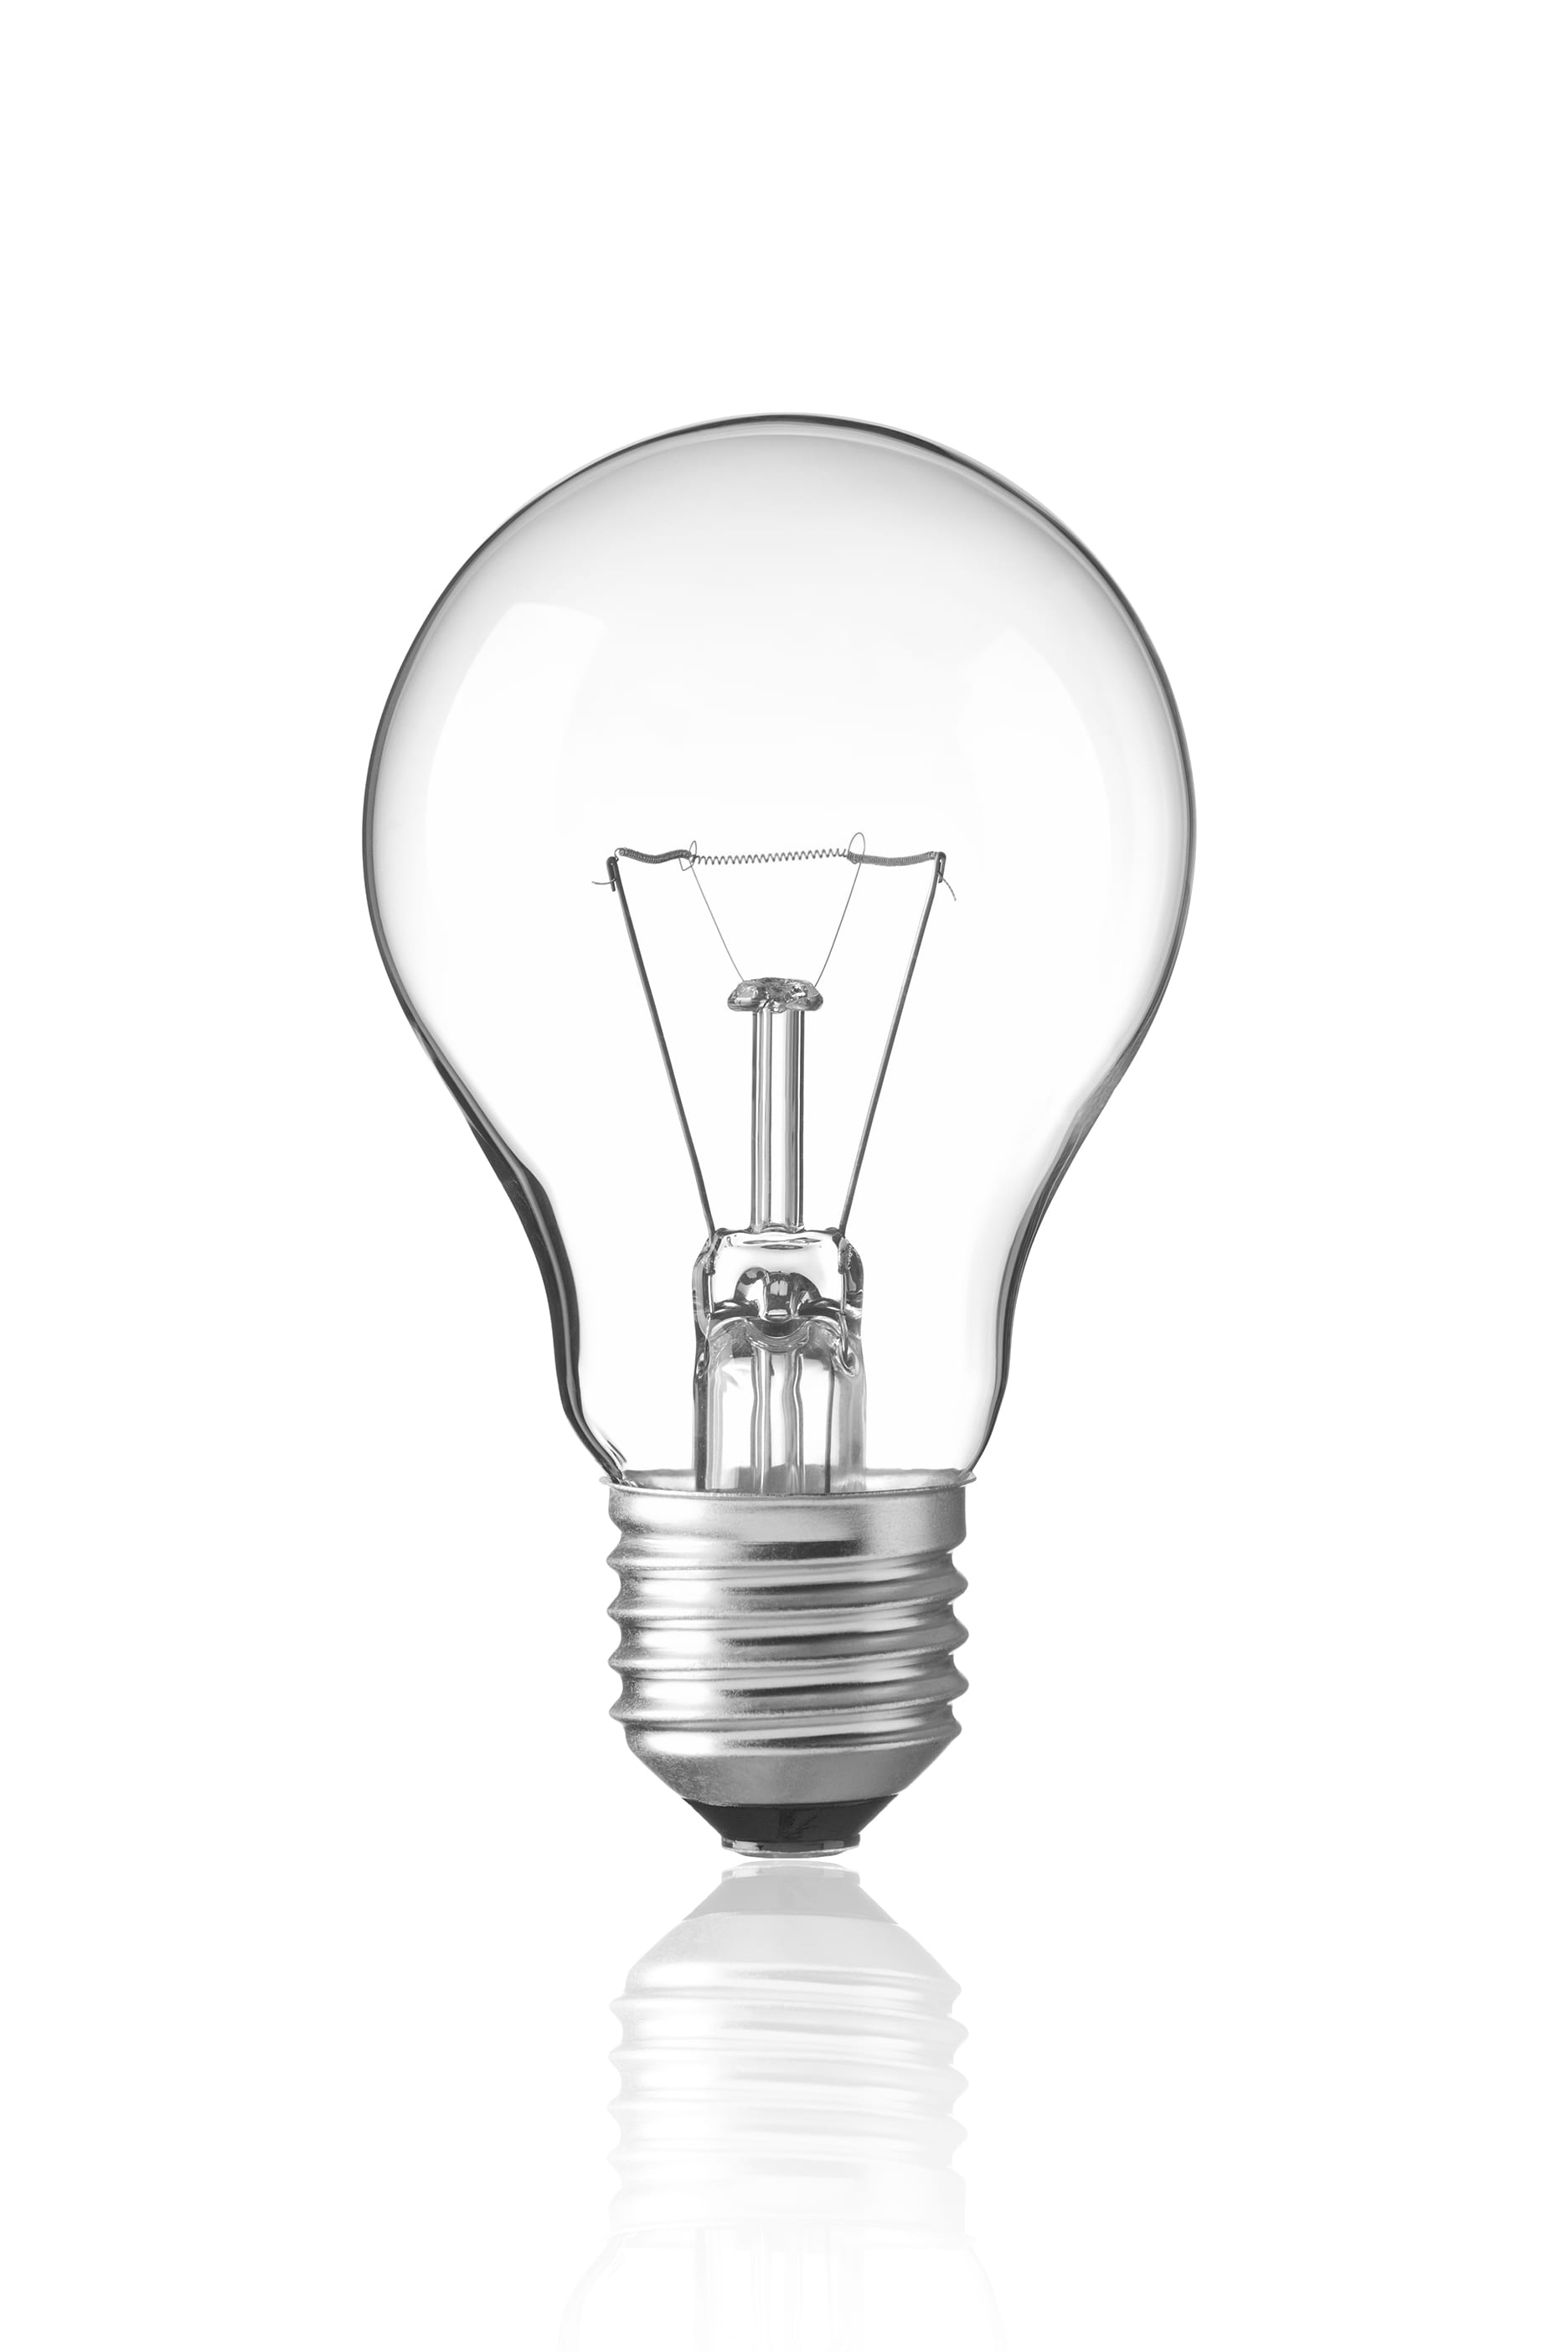 A single clear light bulb on a white background